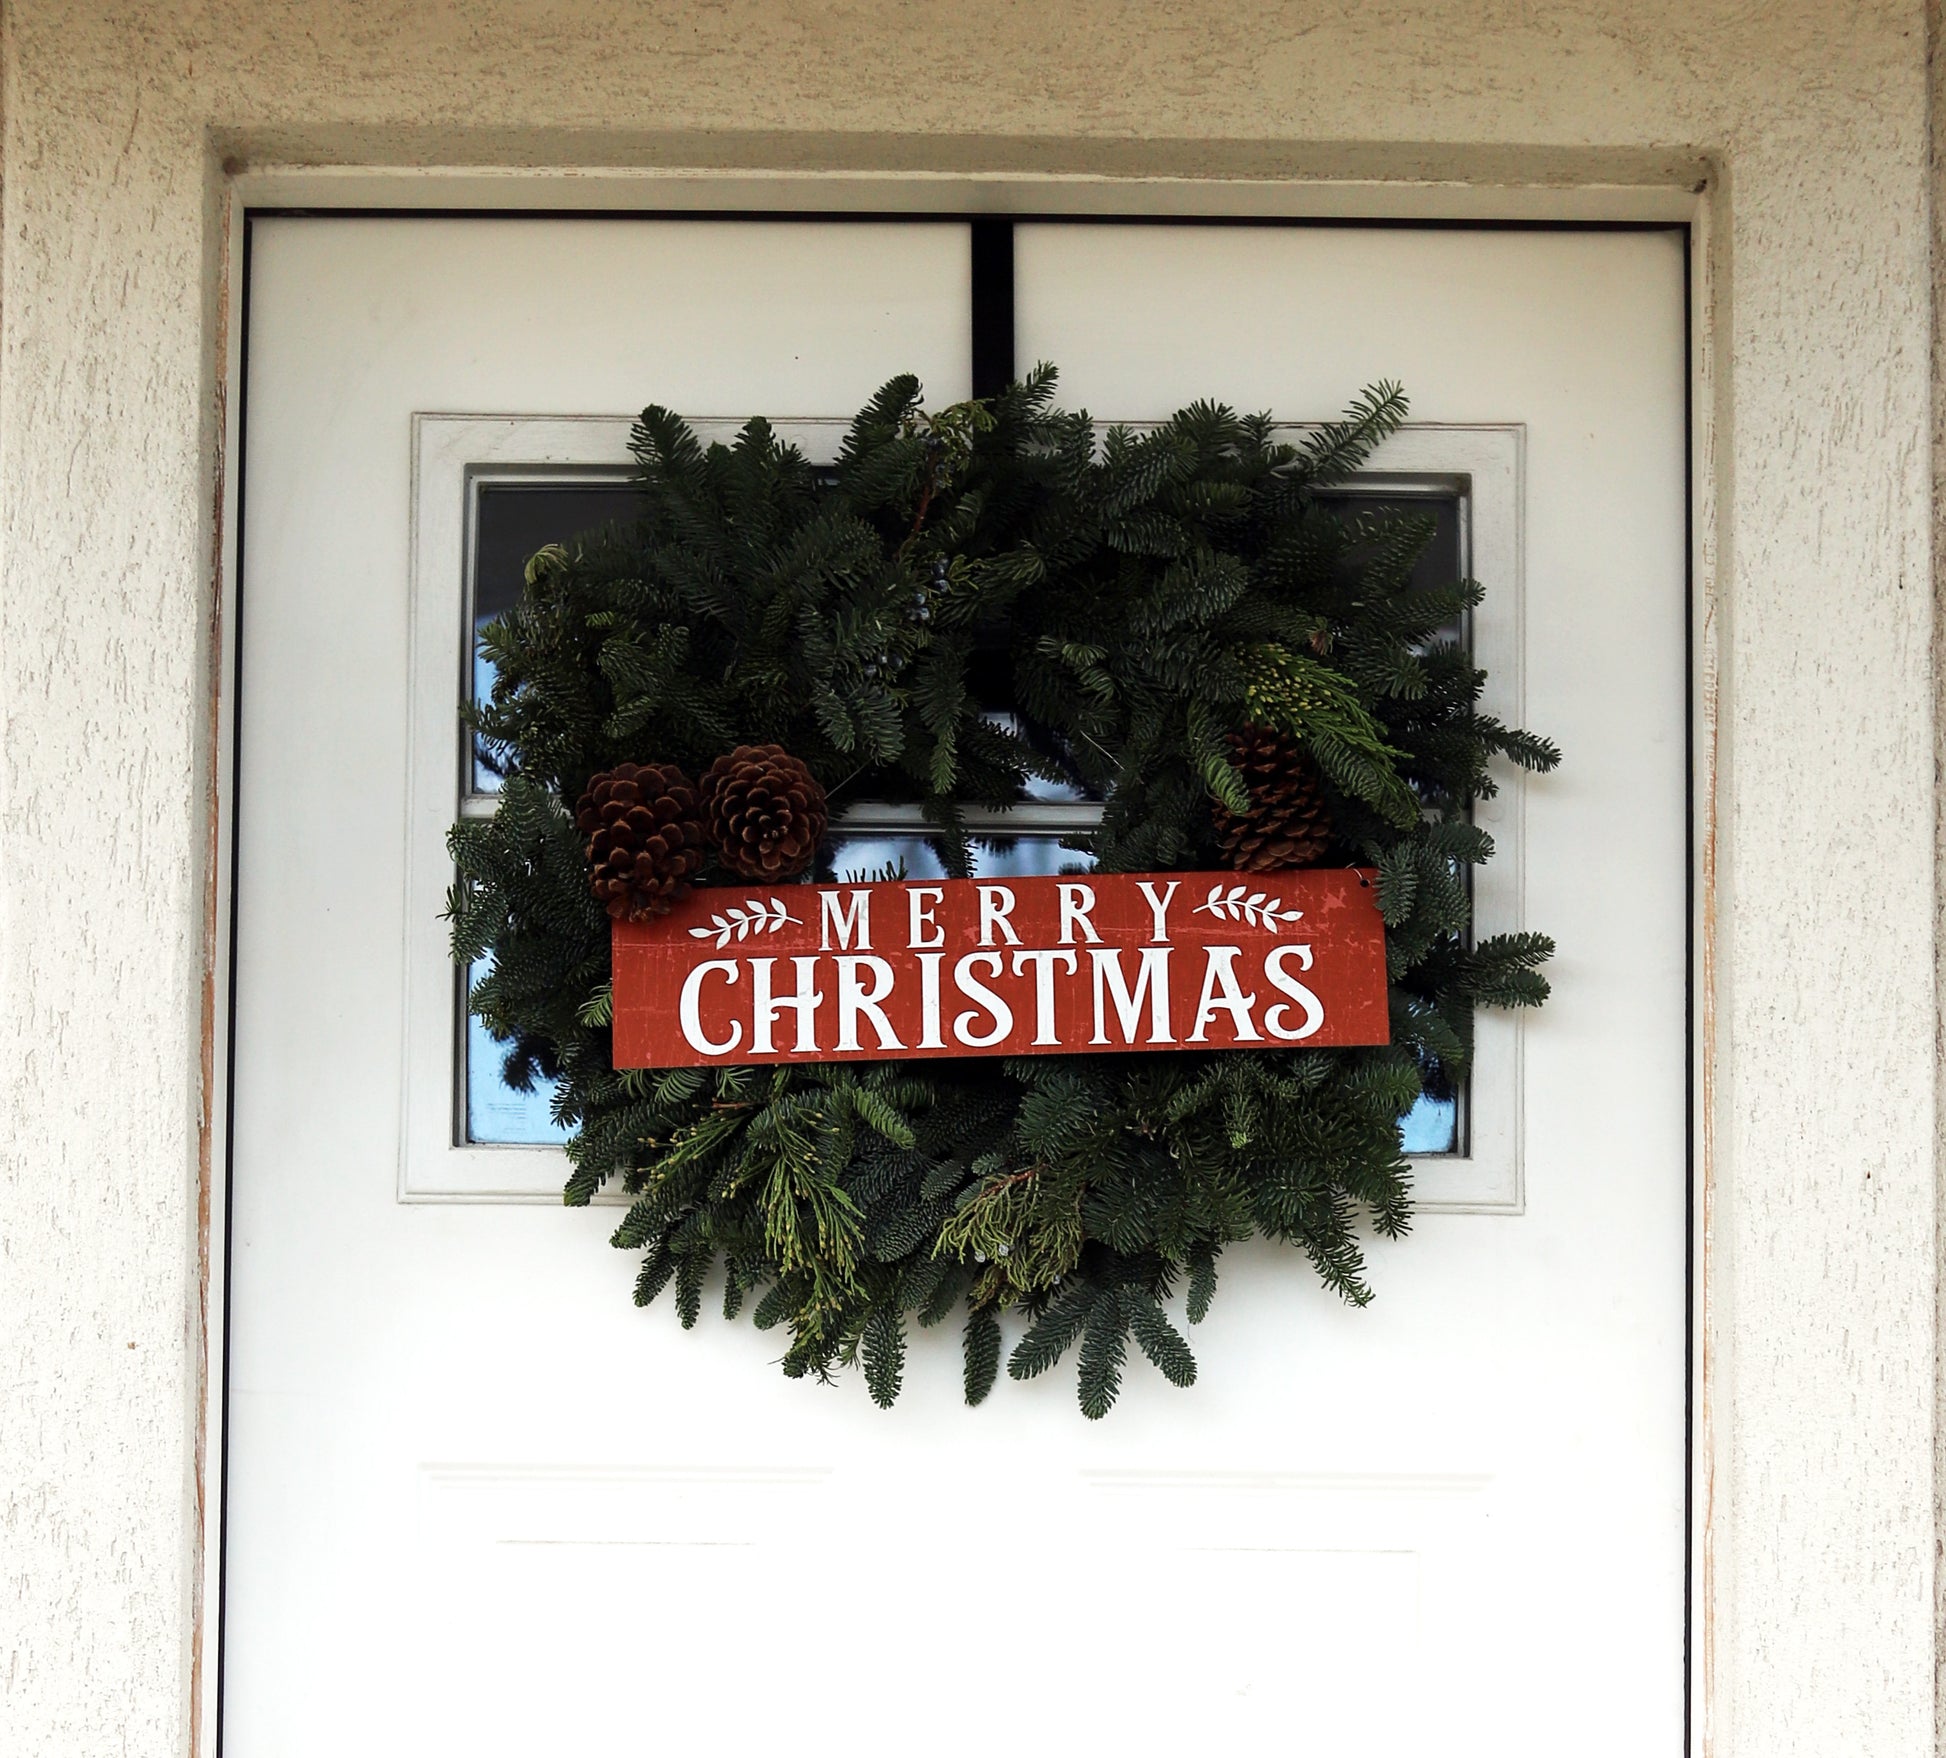 Rustic Red "Merry Christmas" Metal Sign - The Sign Shoppe 